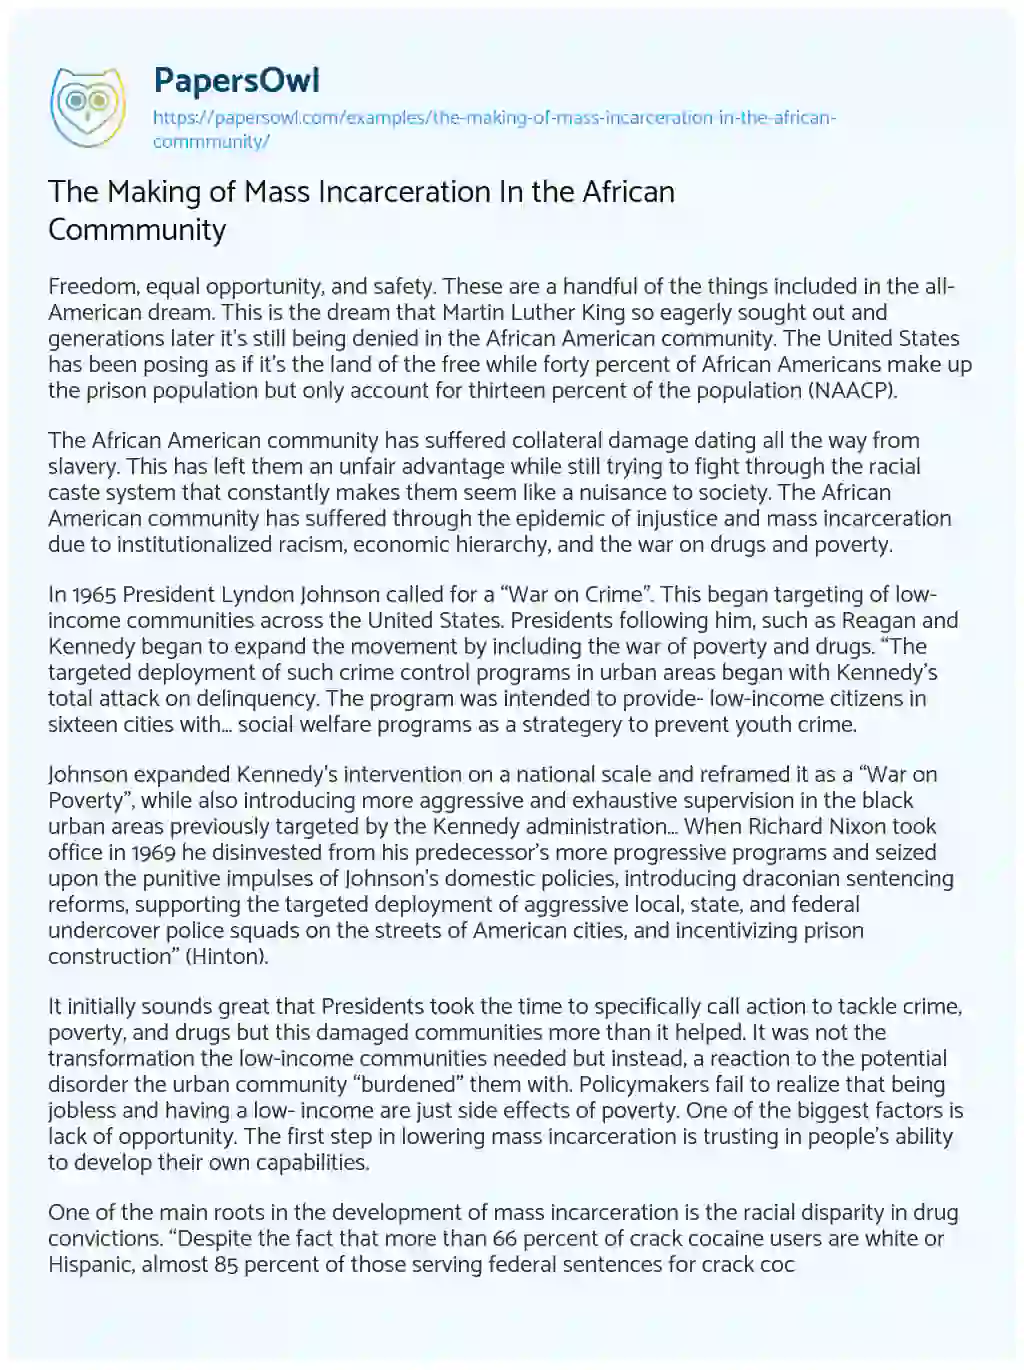 The Making of Mass Incarceration in the African Commmunity essay